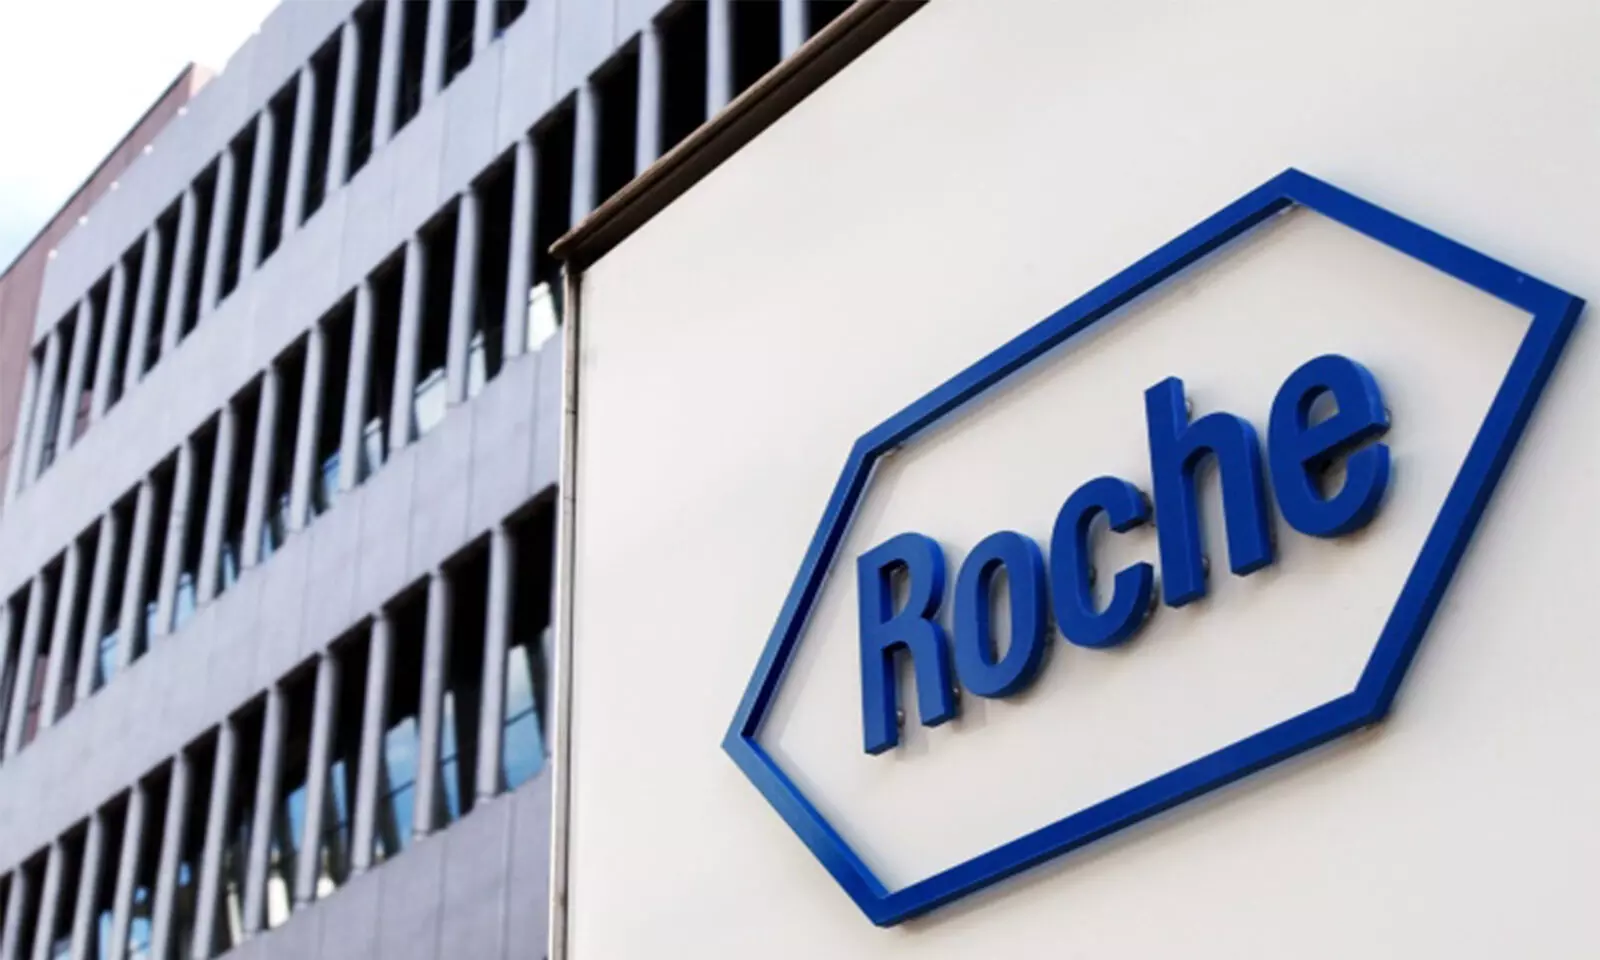 Roche gets European Commission nod for Phesgo to treat HER2-positive breast cancer